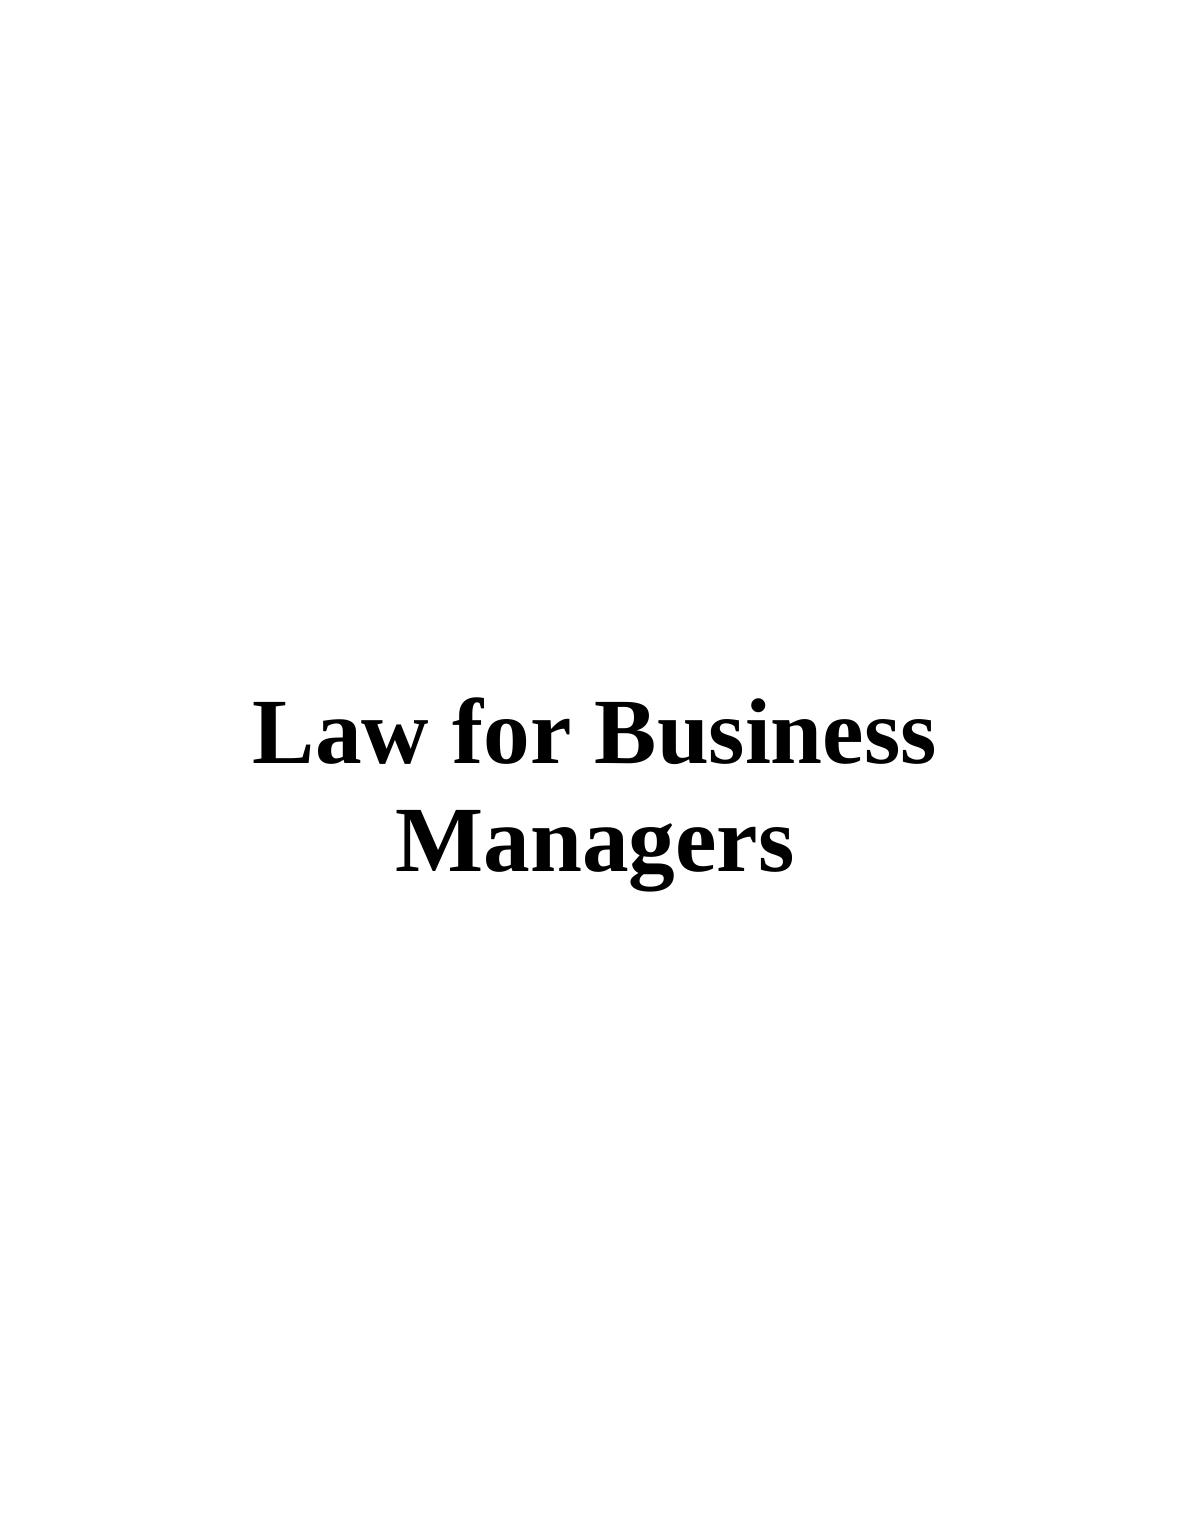 Law for Business Managers in UK_1